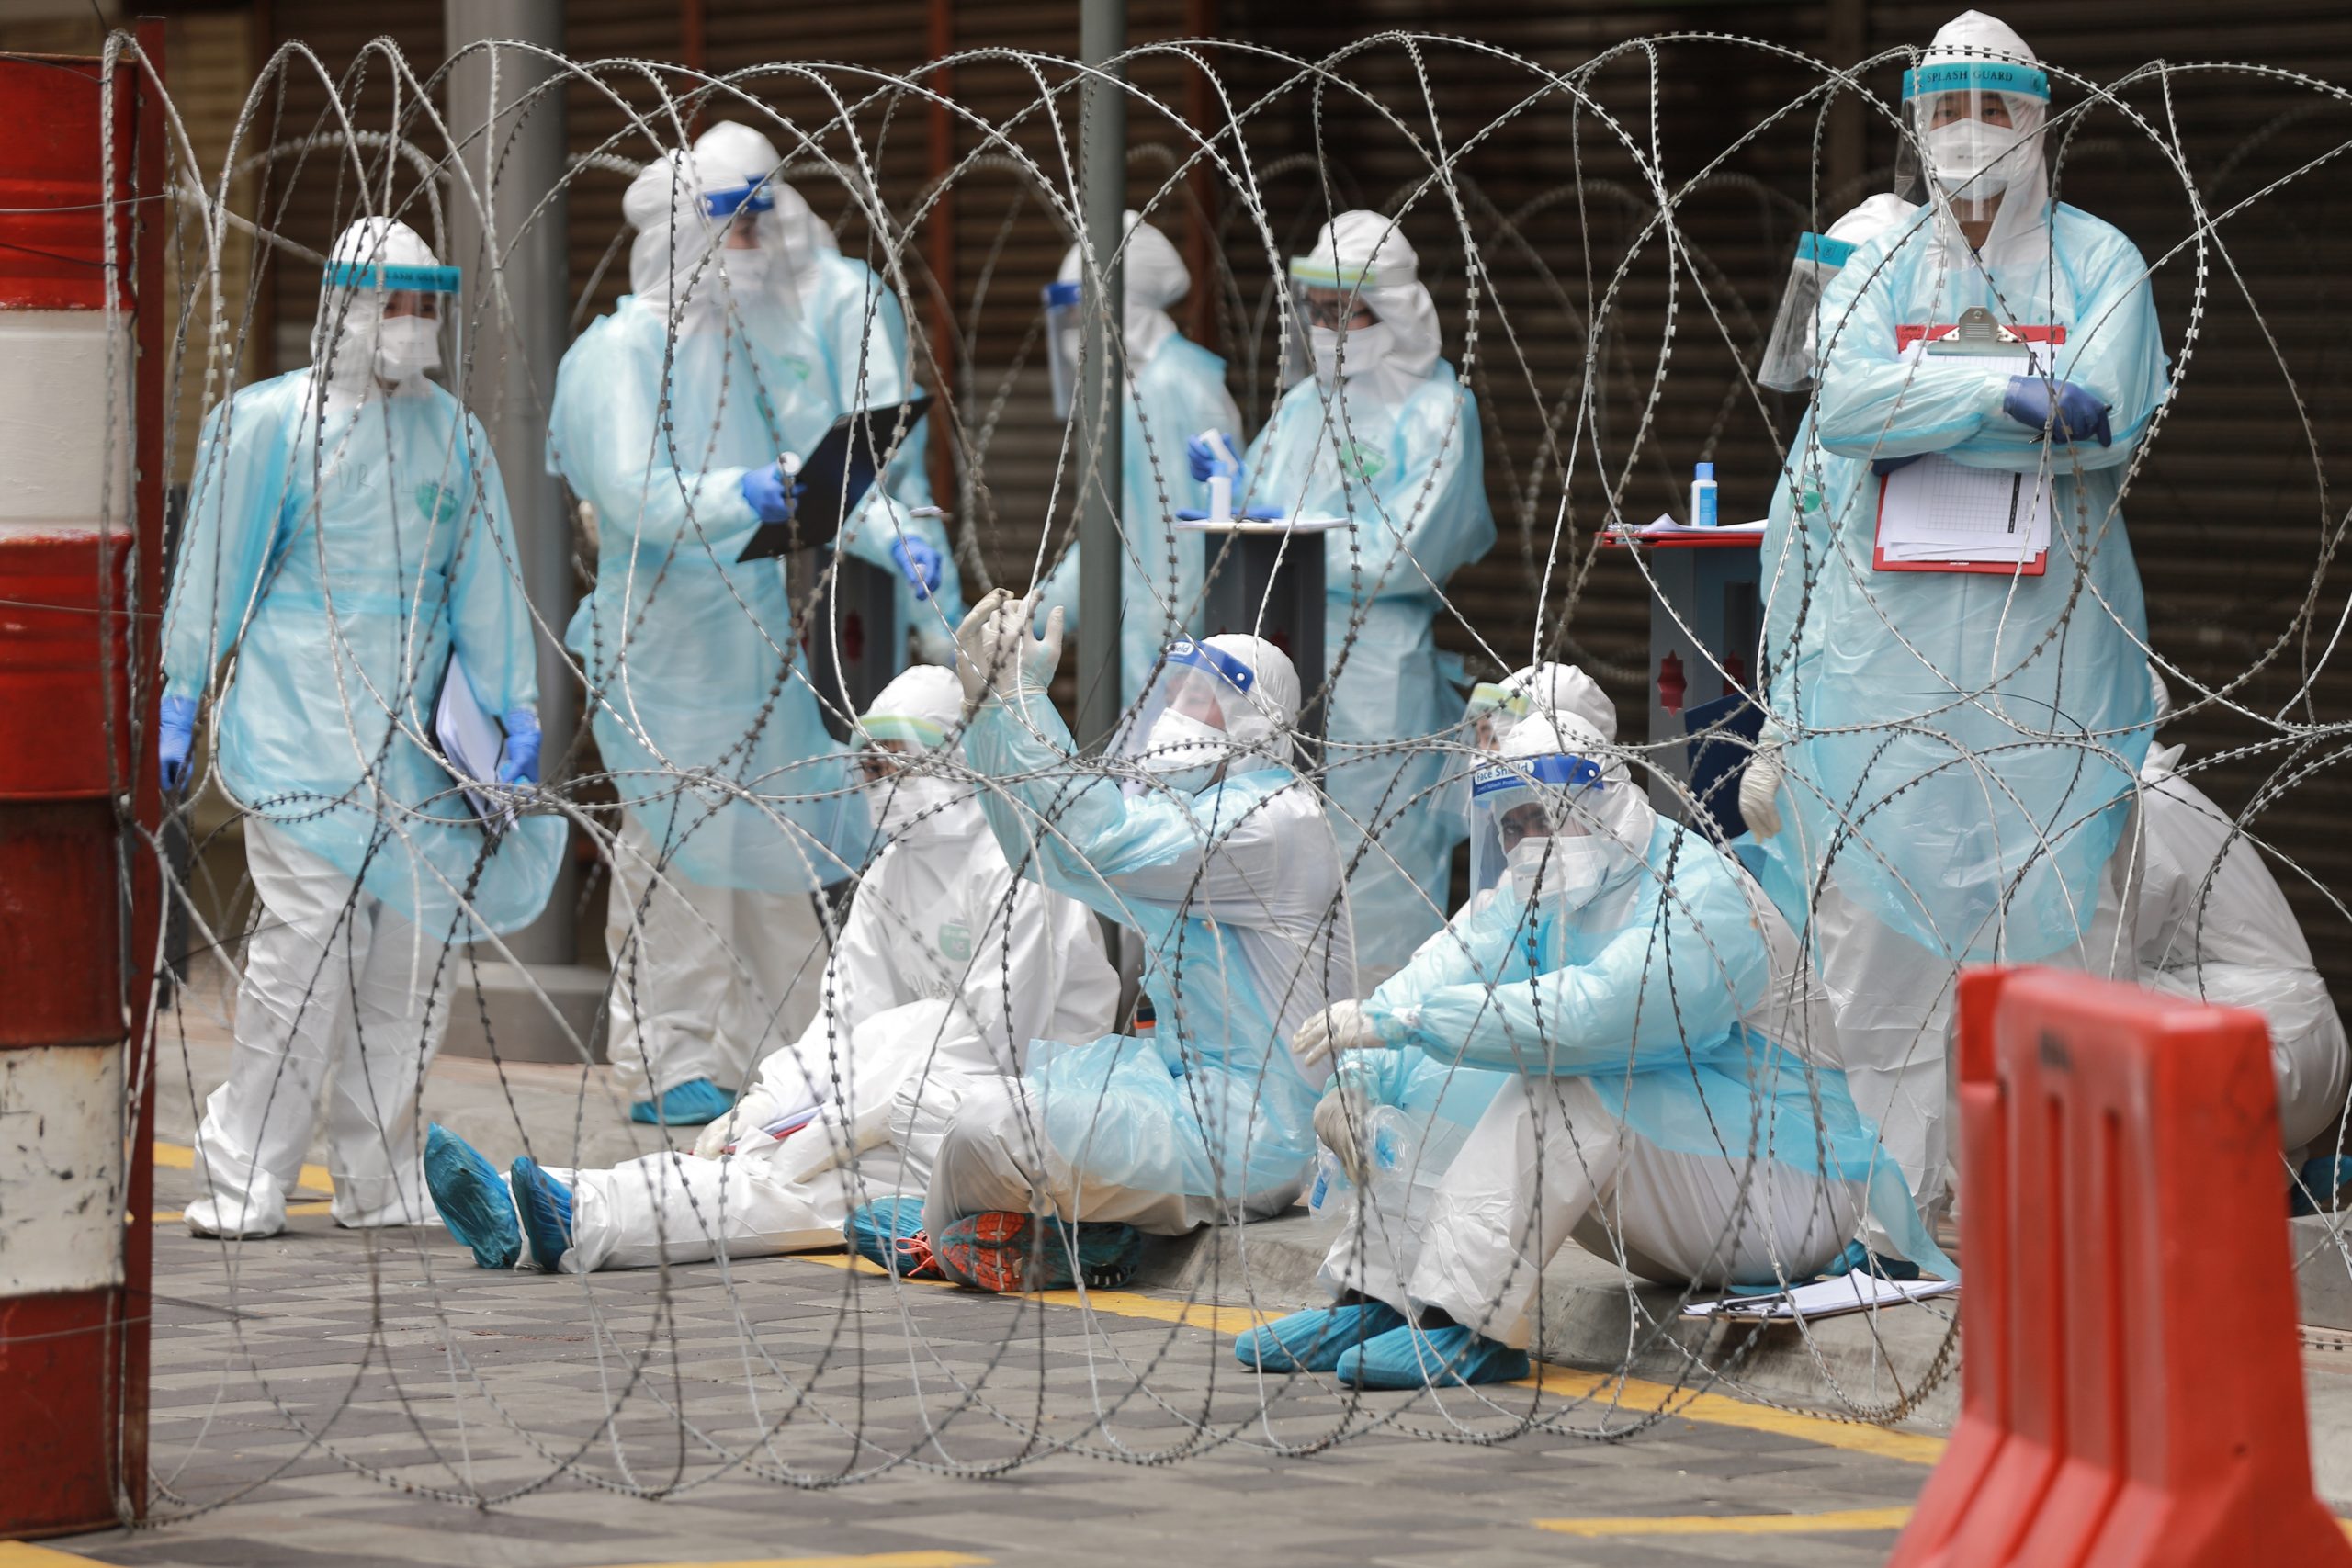 Malaysia medical personnel wearing personal protective equipment as a protection during the Covid-19 screening in Kuala Lumpur in April 2020. Image: Shutterstock.